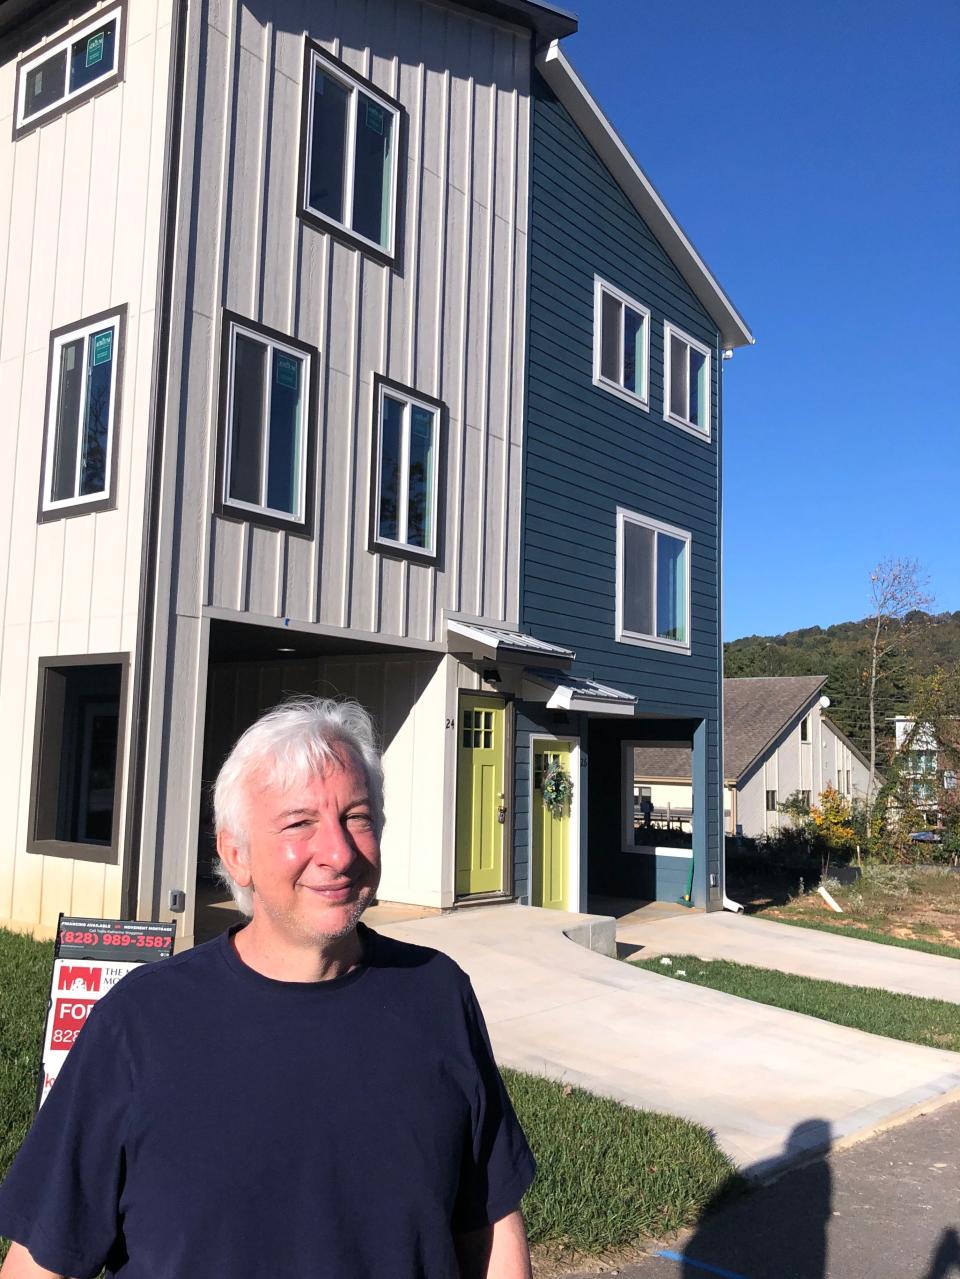 Barry Bailik's company, Compact Cottages, is building the 45-home Atkinsville subdivision in South Asheville. The "tall homes" start around $200,000, a price point that's hard to come by for new homes in Asheville, Bialik says.